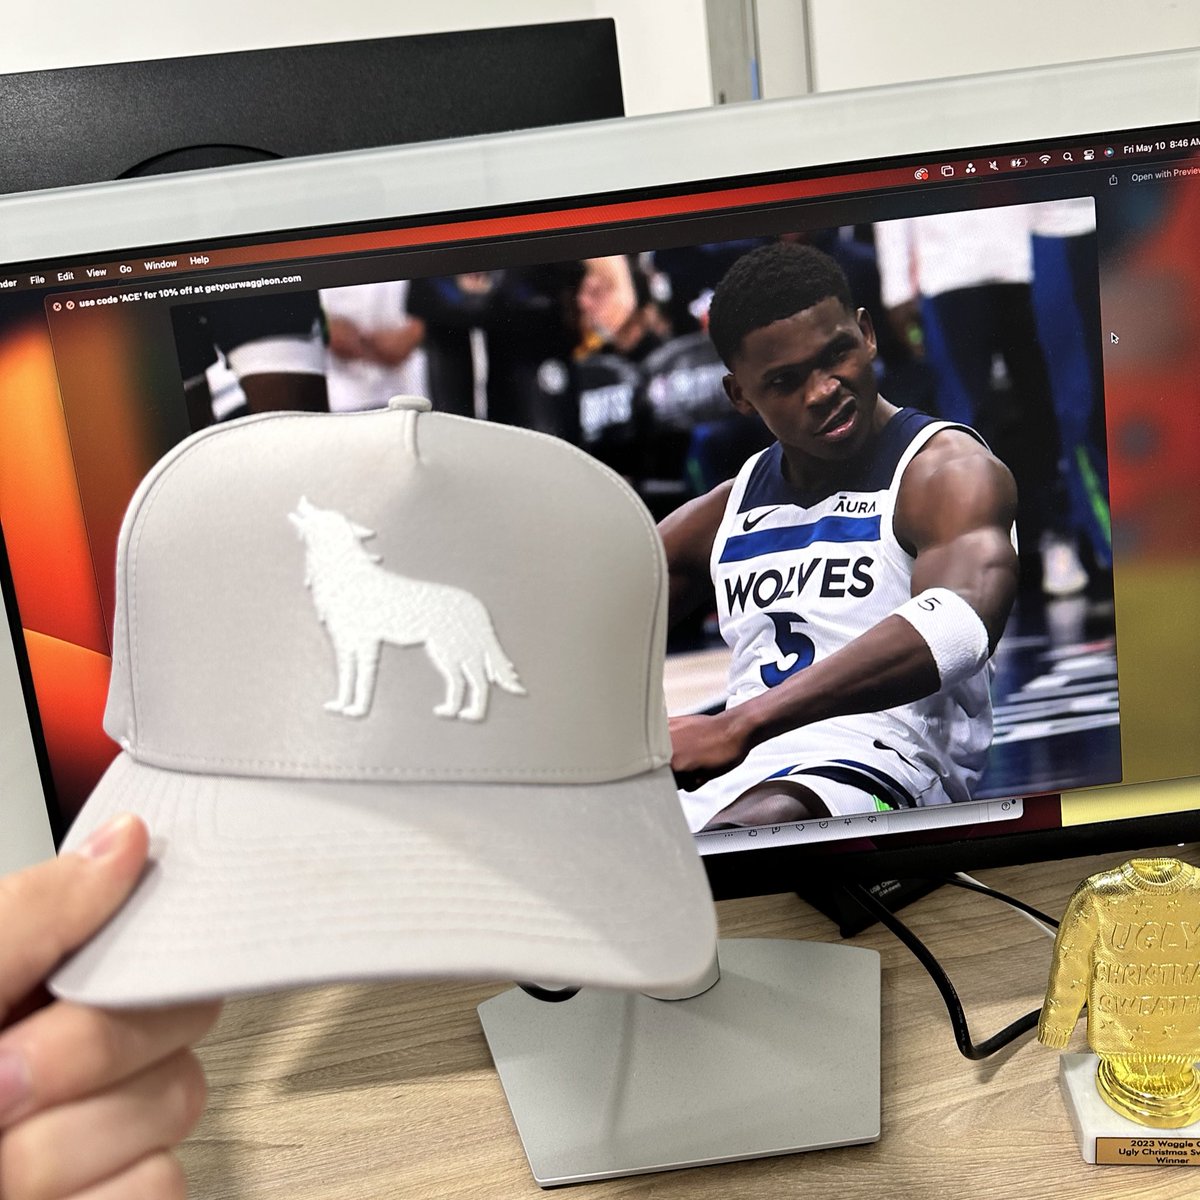 If the Wolves win Game 3 tonight, we’ll give away this wolf hat to someone who likes and retweets this post #WolvesBack